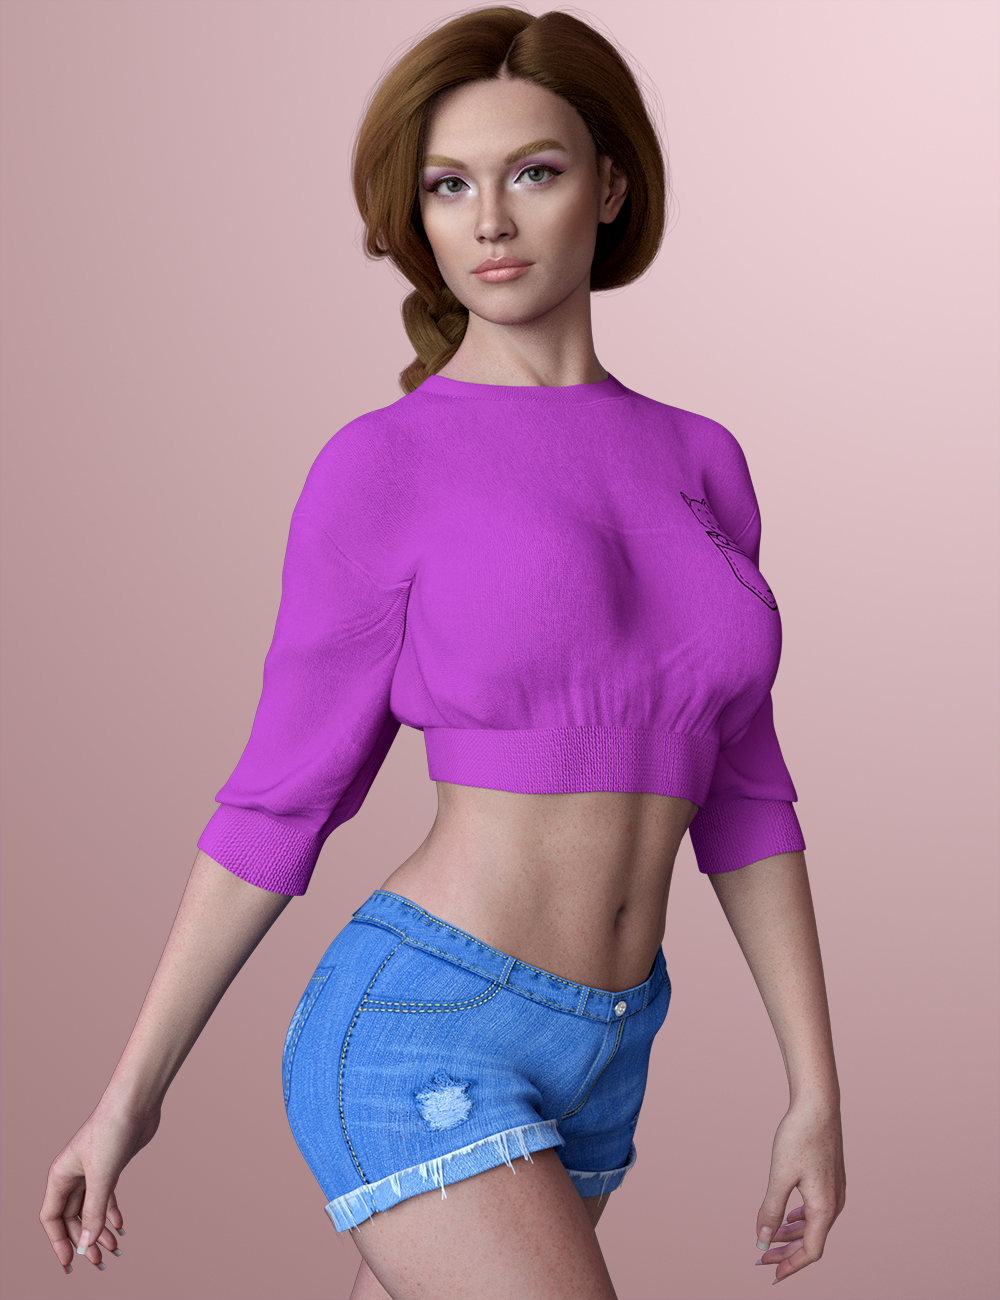 Dforce X Fashion Summer Girl Outfit For Genesis 9 Daz 3d